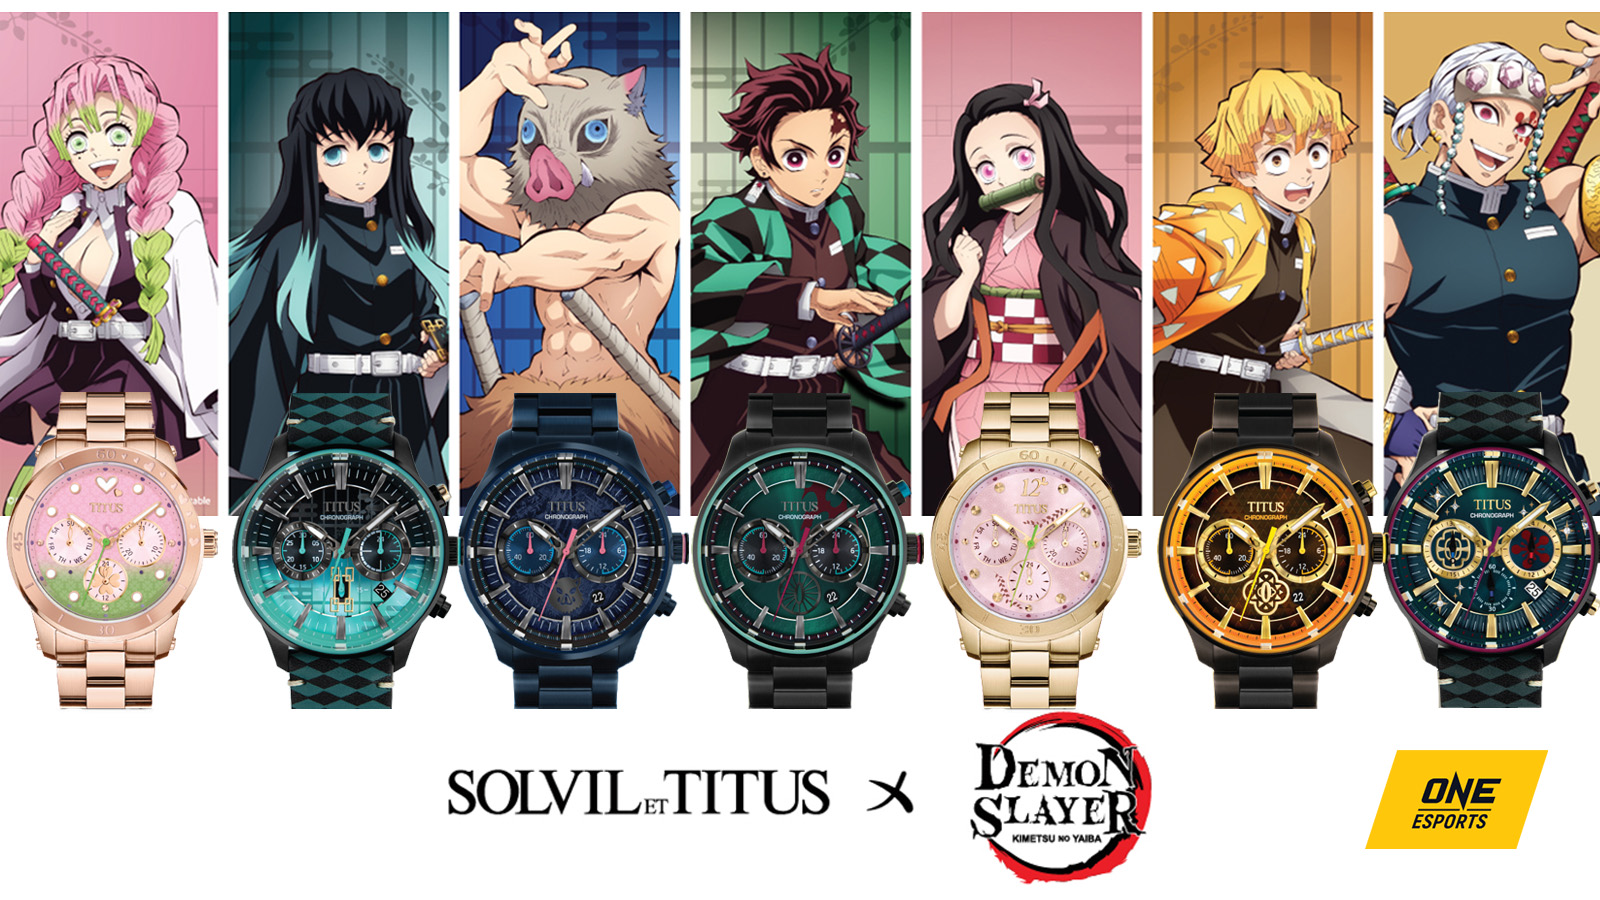 Chainsaw Man TV Anime Collabs with Seiko for Devilishly Cool Watch -  Crunchyroll News